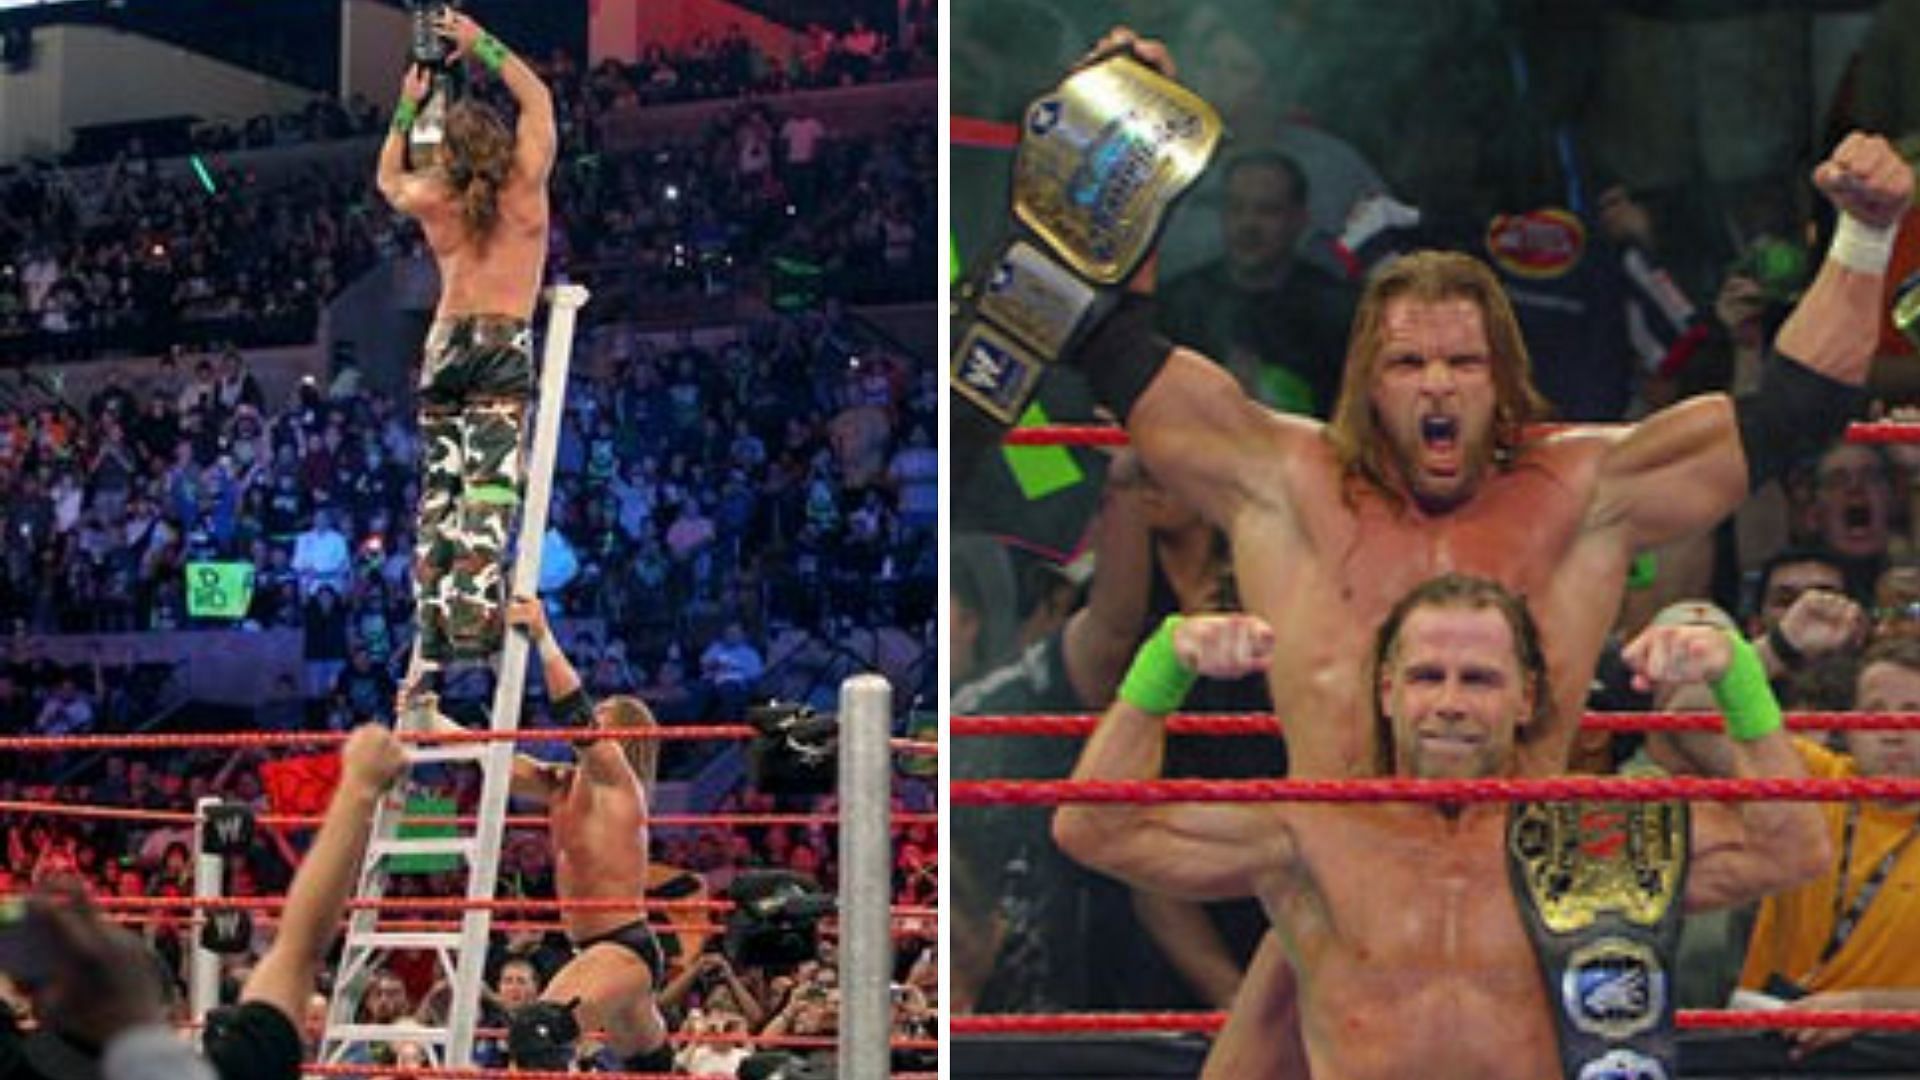 DX defeated Jeri-Show in the main event of TLC 2009